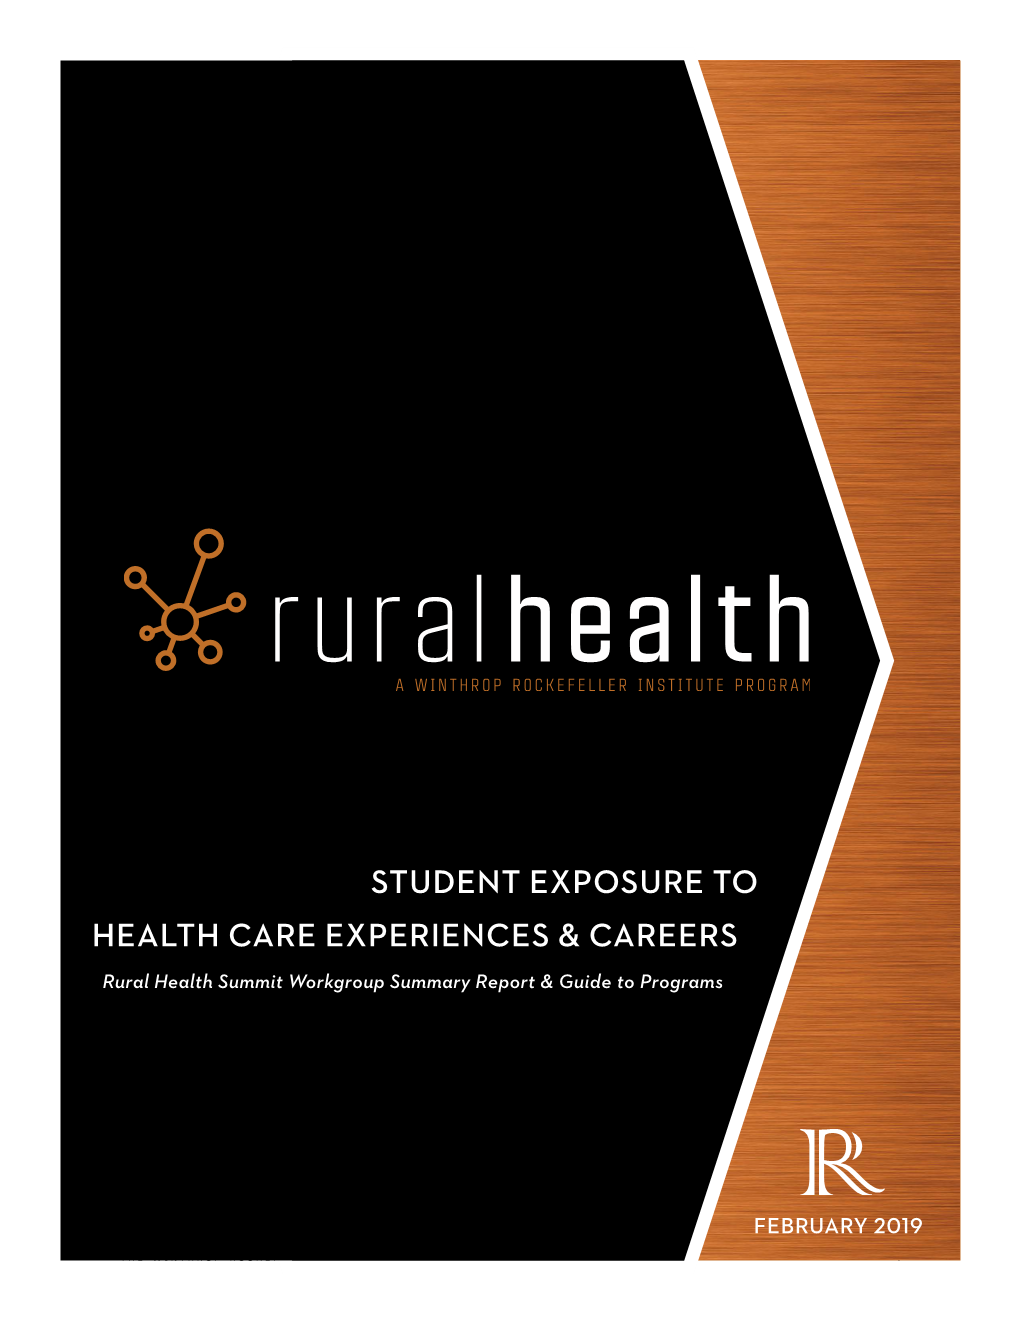 Student Exposure to Health Care Experiences & Careers